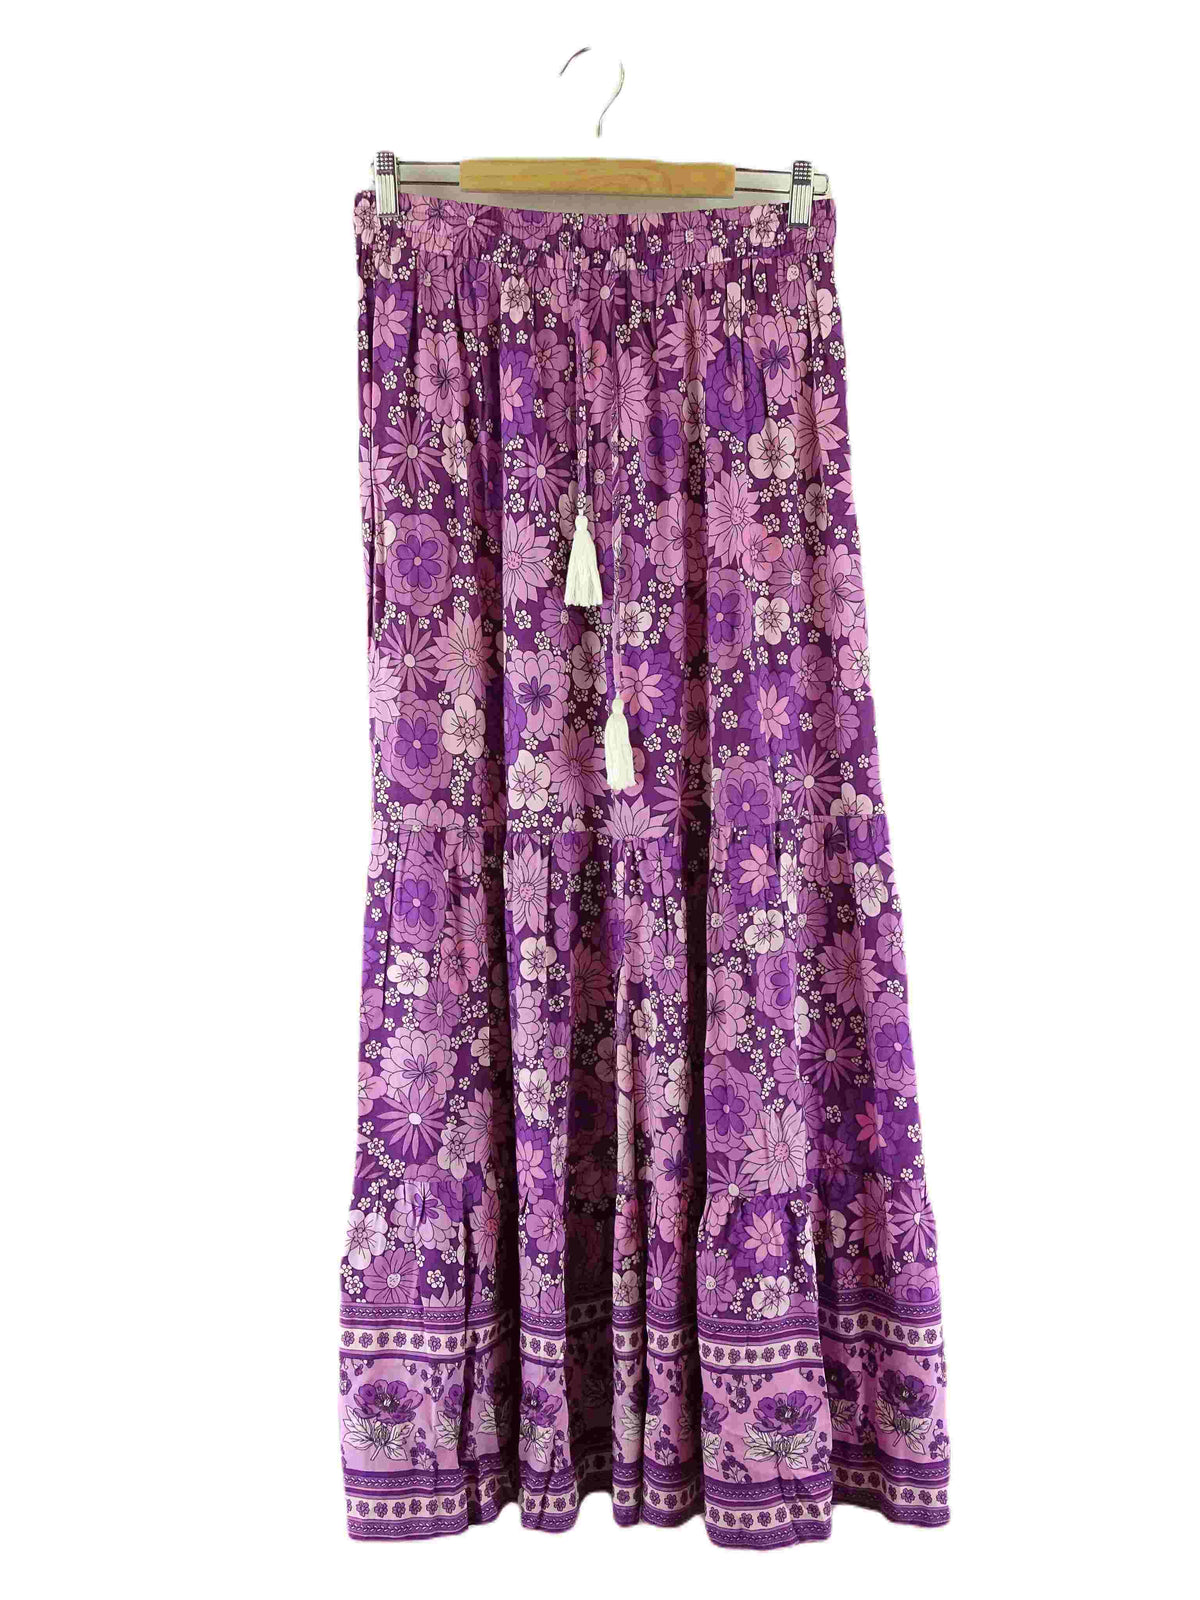 Salty Bright Purple Floral Maxi Skirt 14